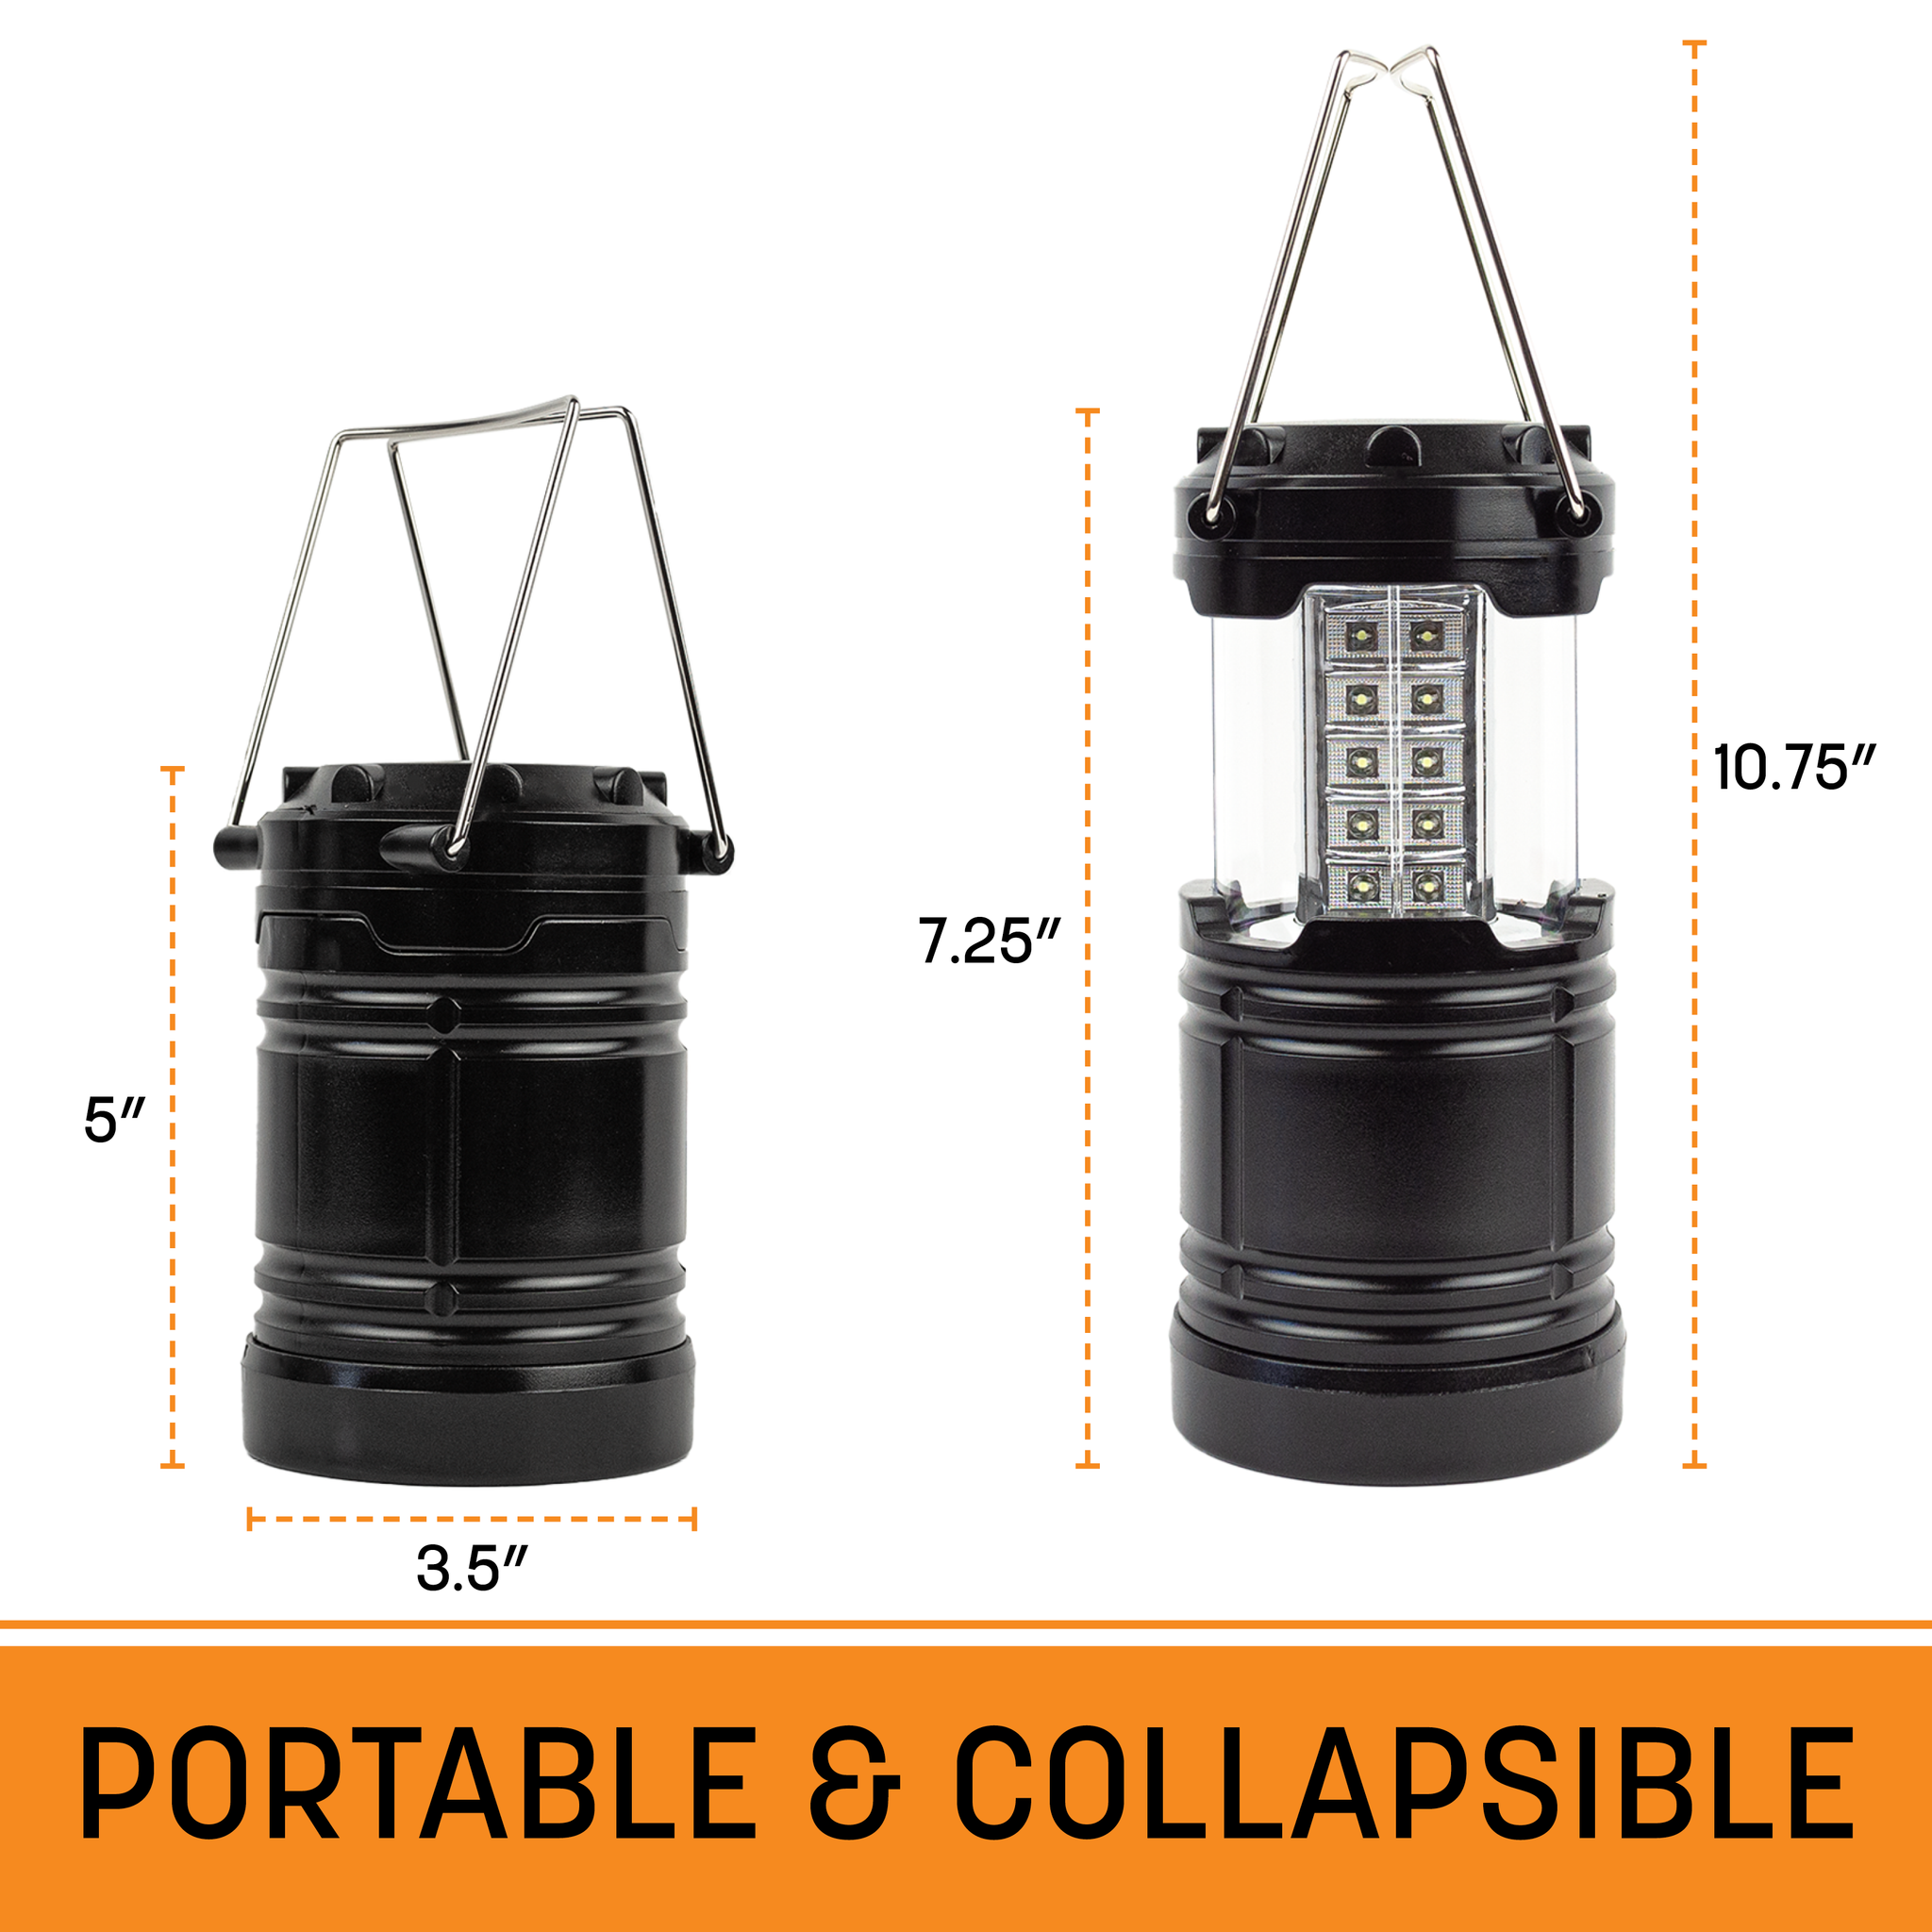 Promotional Small Collapsible Lantern $7.25